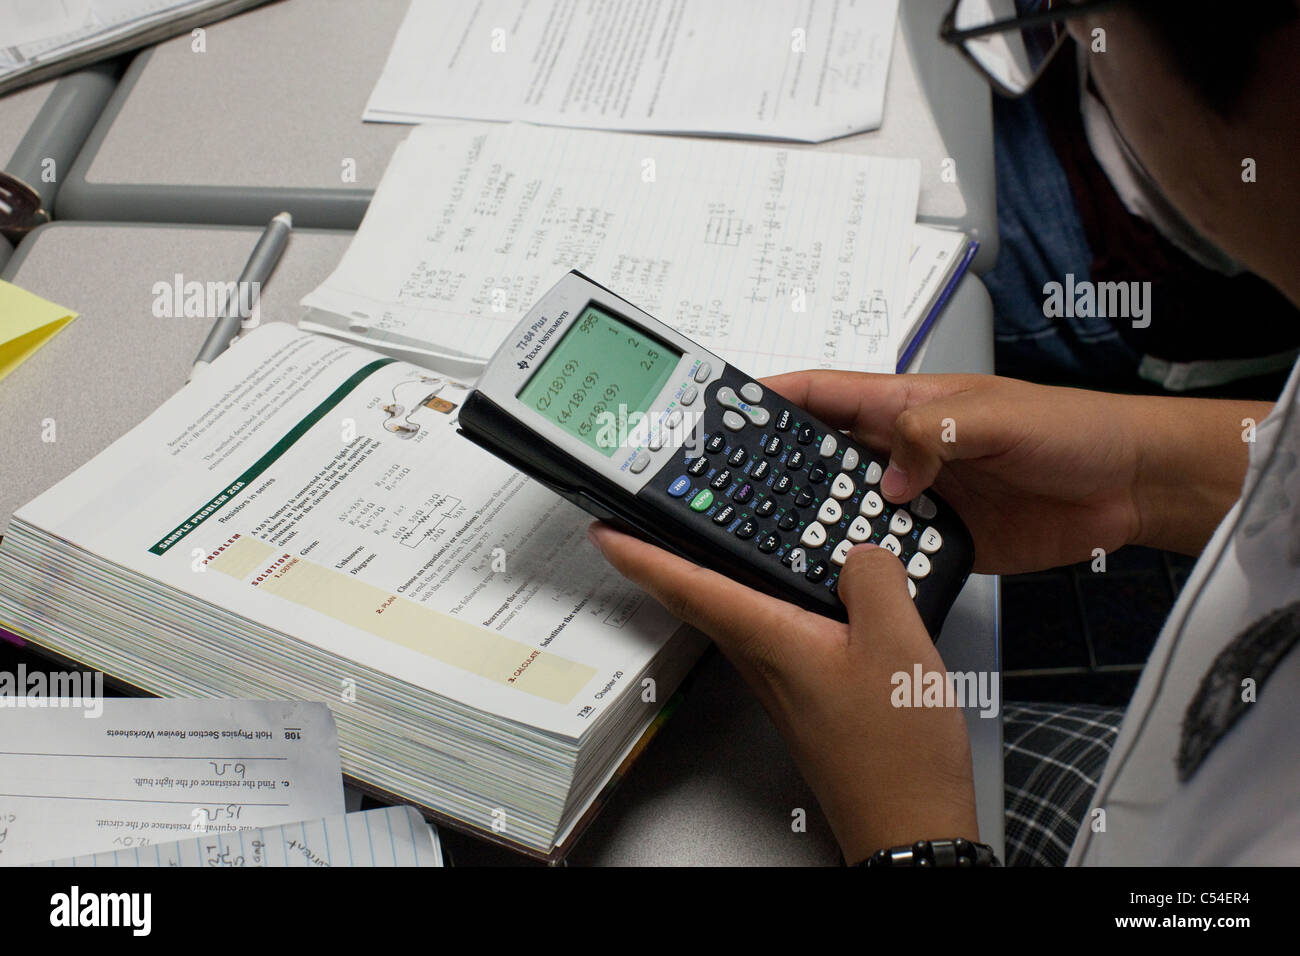 Student uses graphing calculator to help solve problem in textbook during class in El Paso, Texas high school classroom Stock Photo